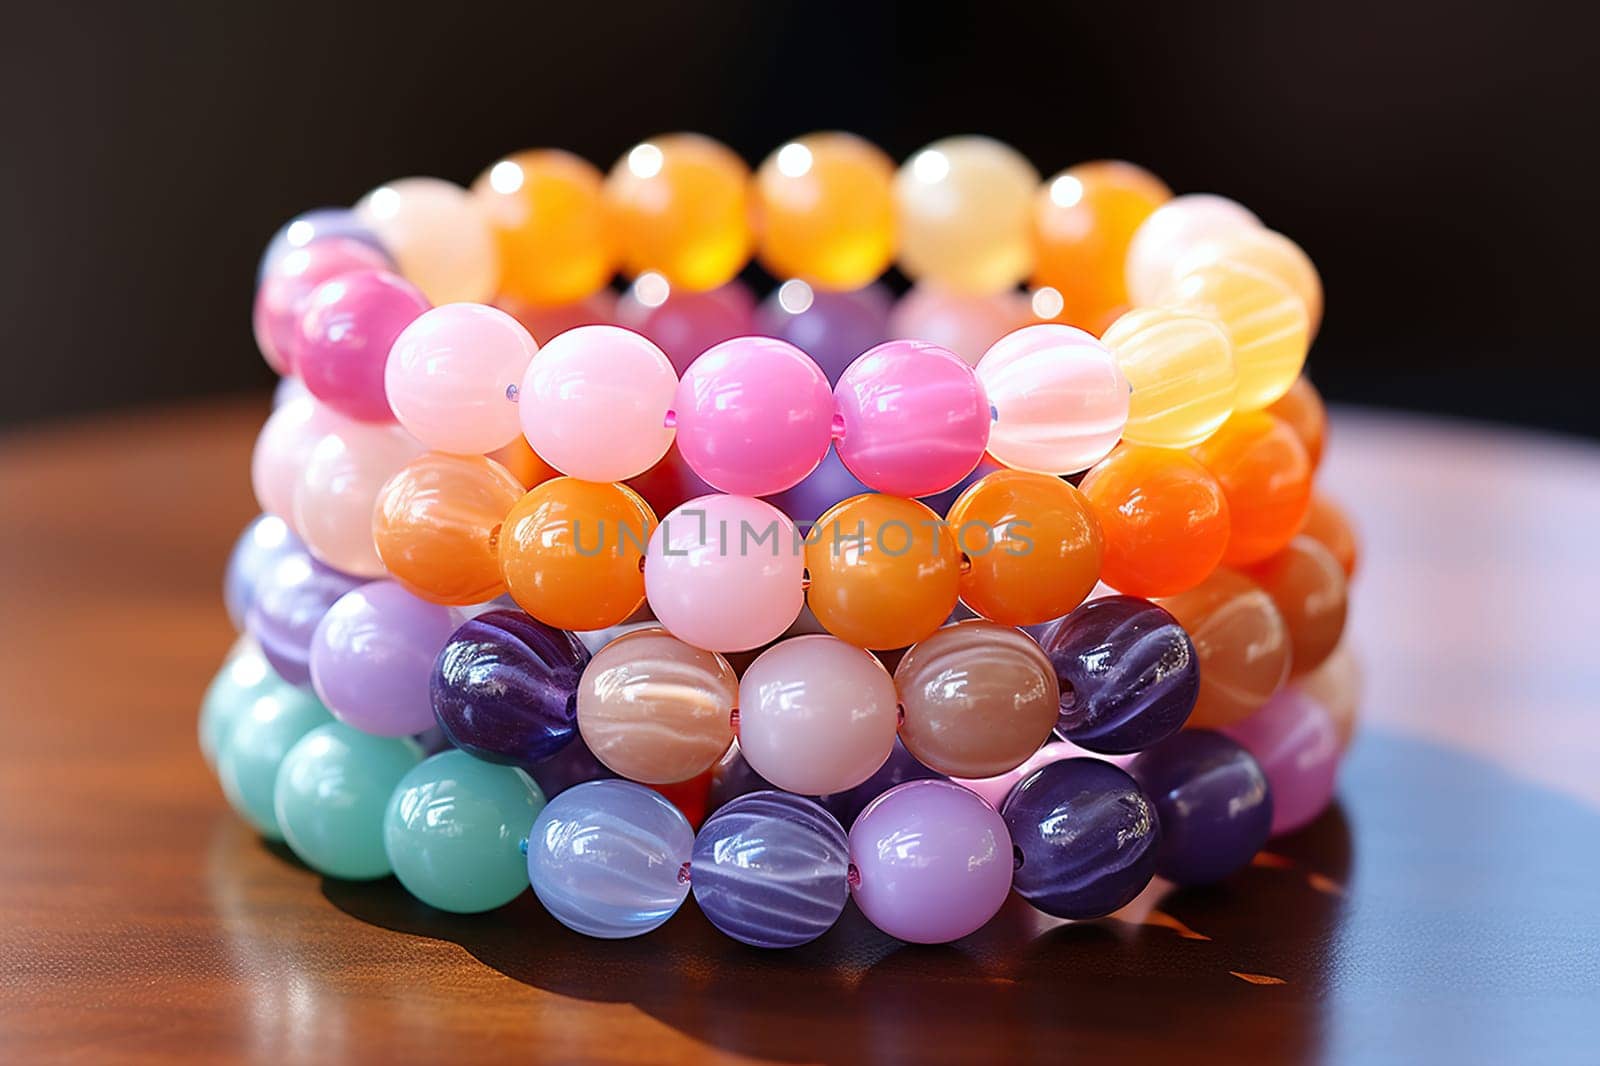 Stack of bracelets made of beads on a wooden table.